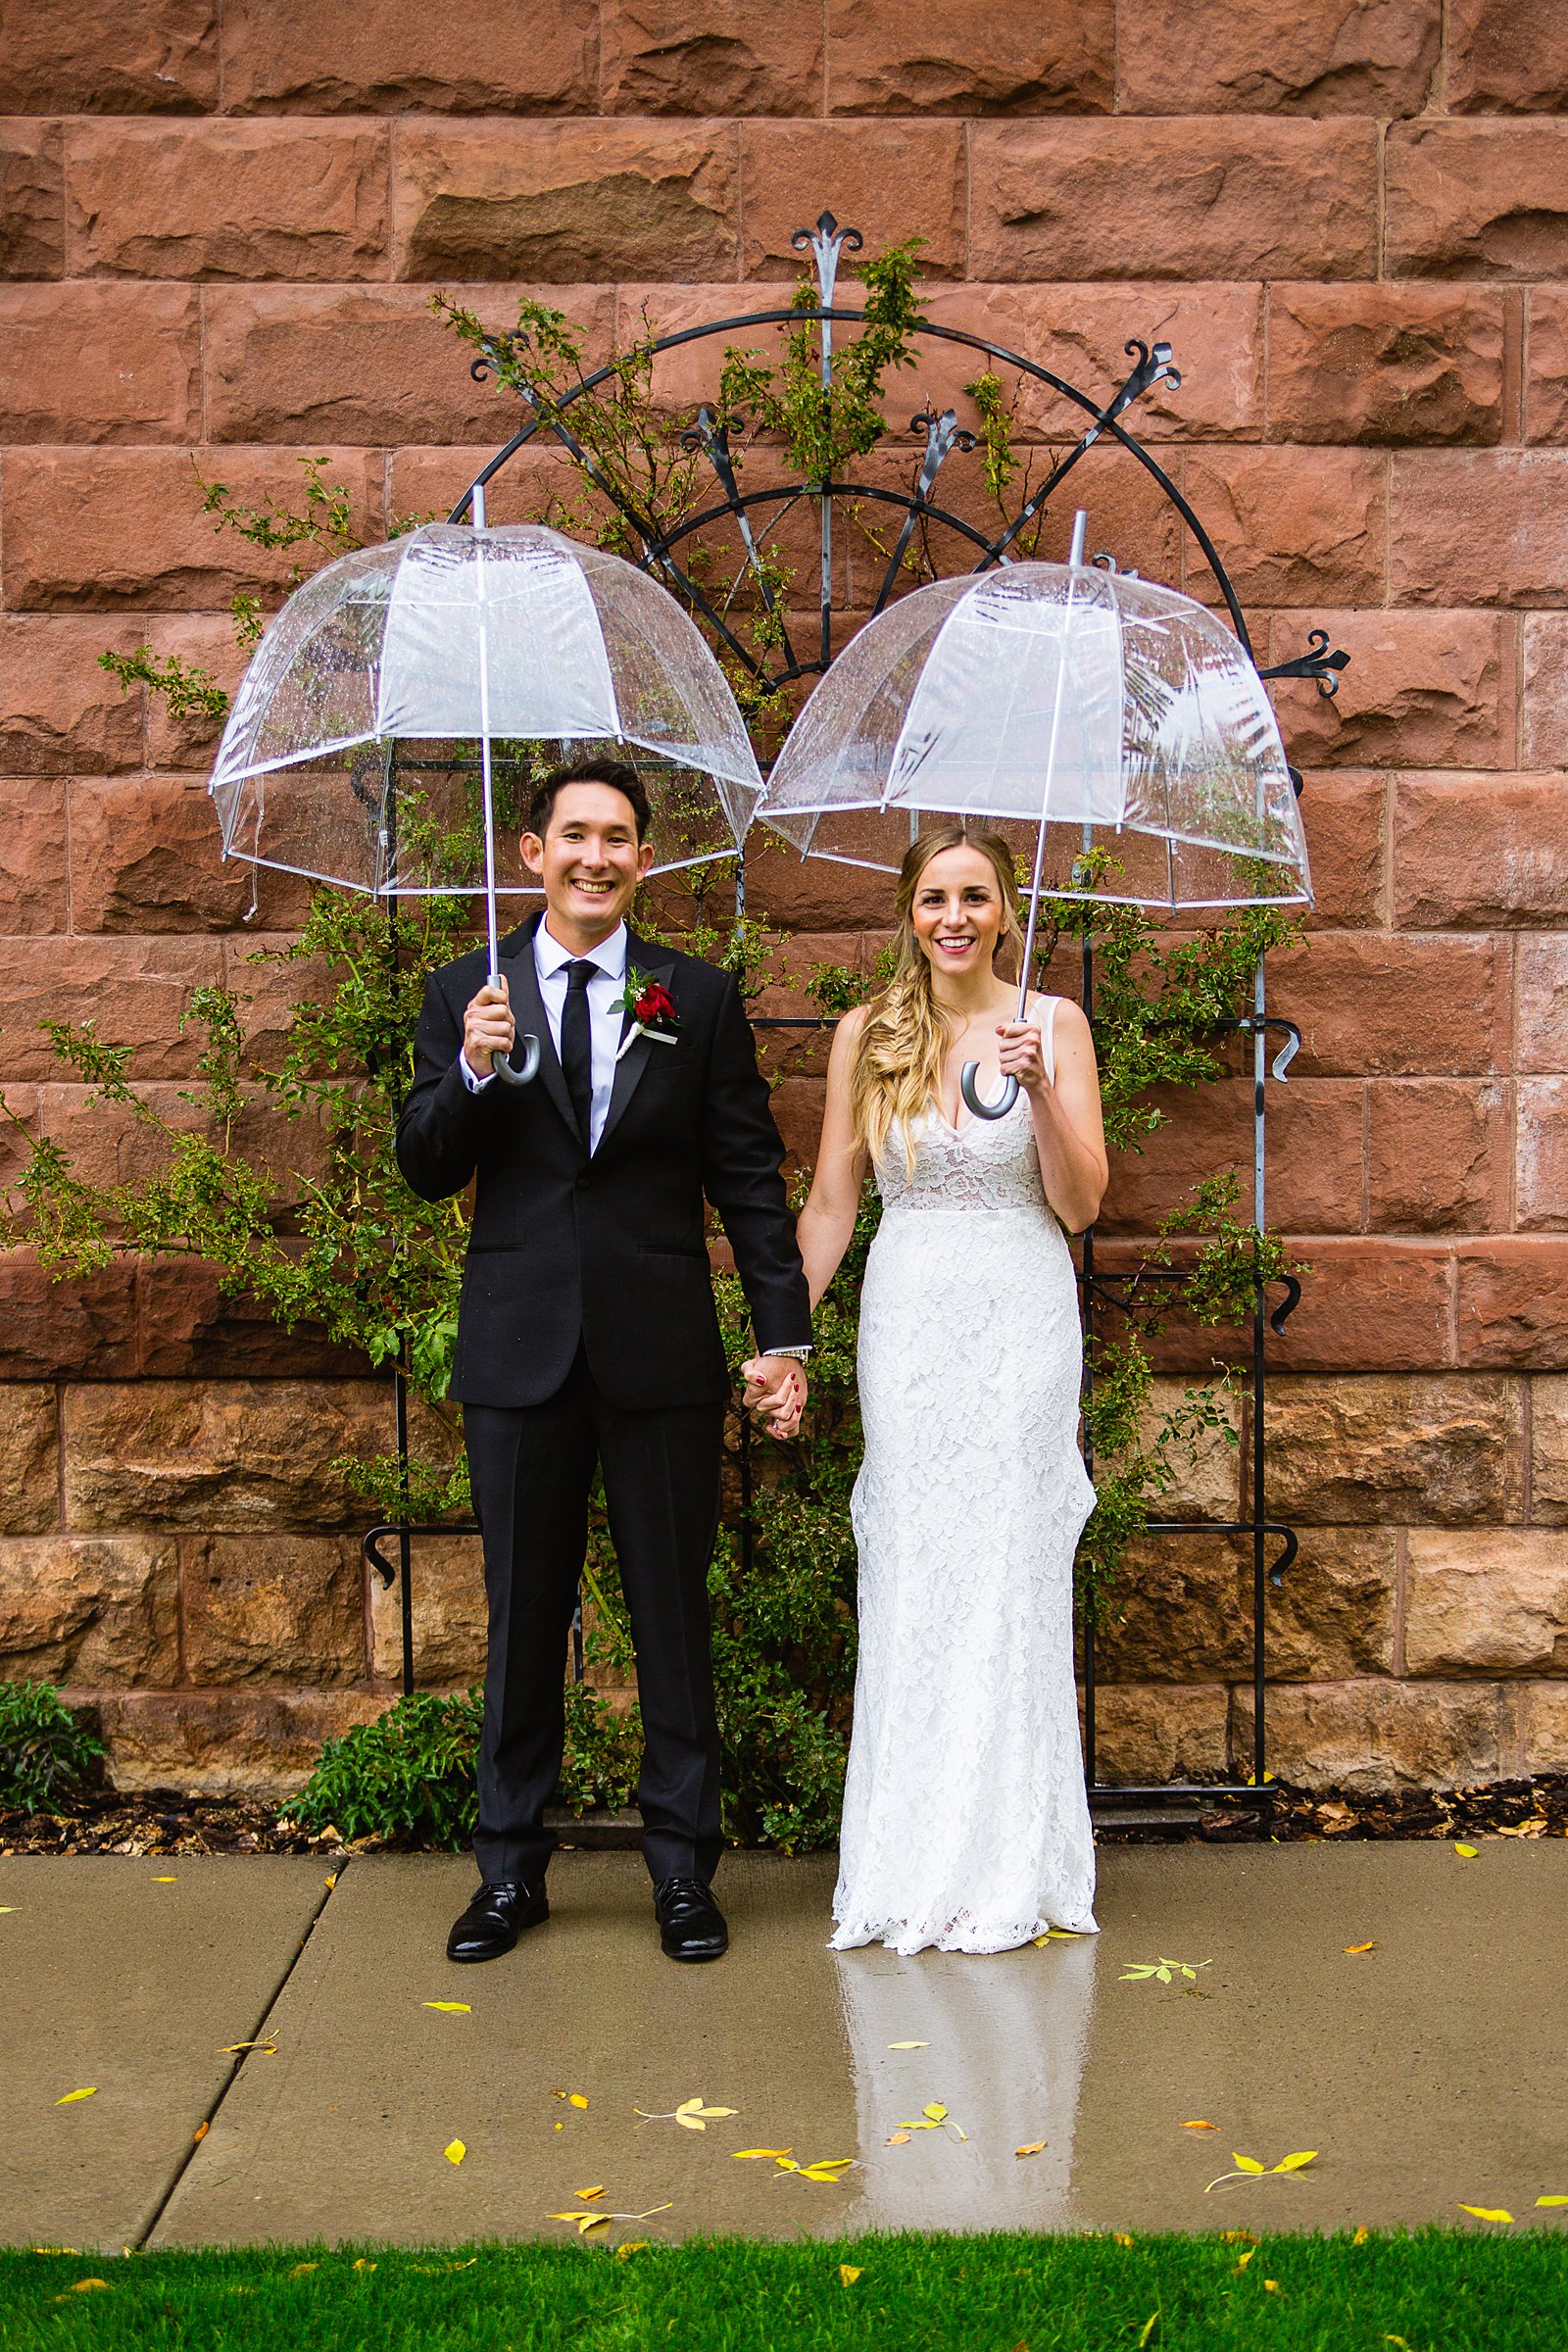 Bride and groom pose for their rainy Flagstaff Courthouse wedding by Flagstaff wedding photographer PMA Photography.